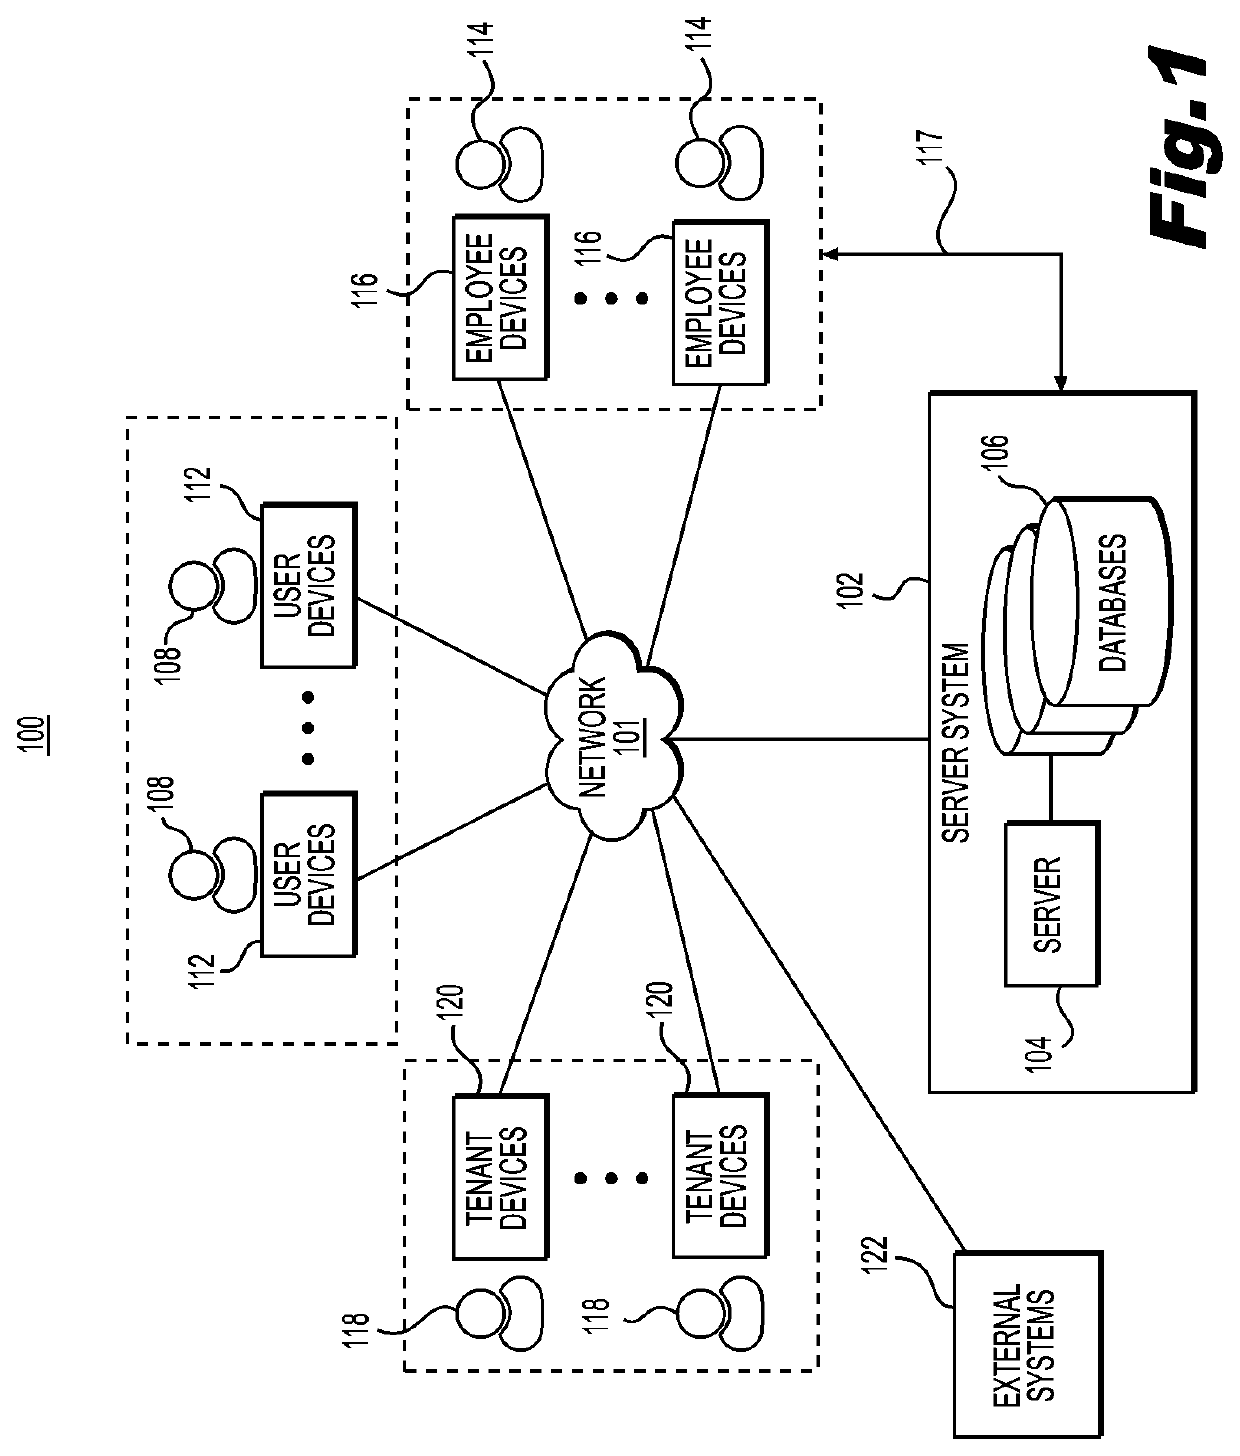 Systems and methods for analysis of wearable items of a clothing subscription platform